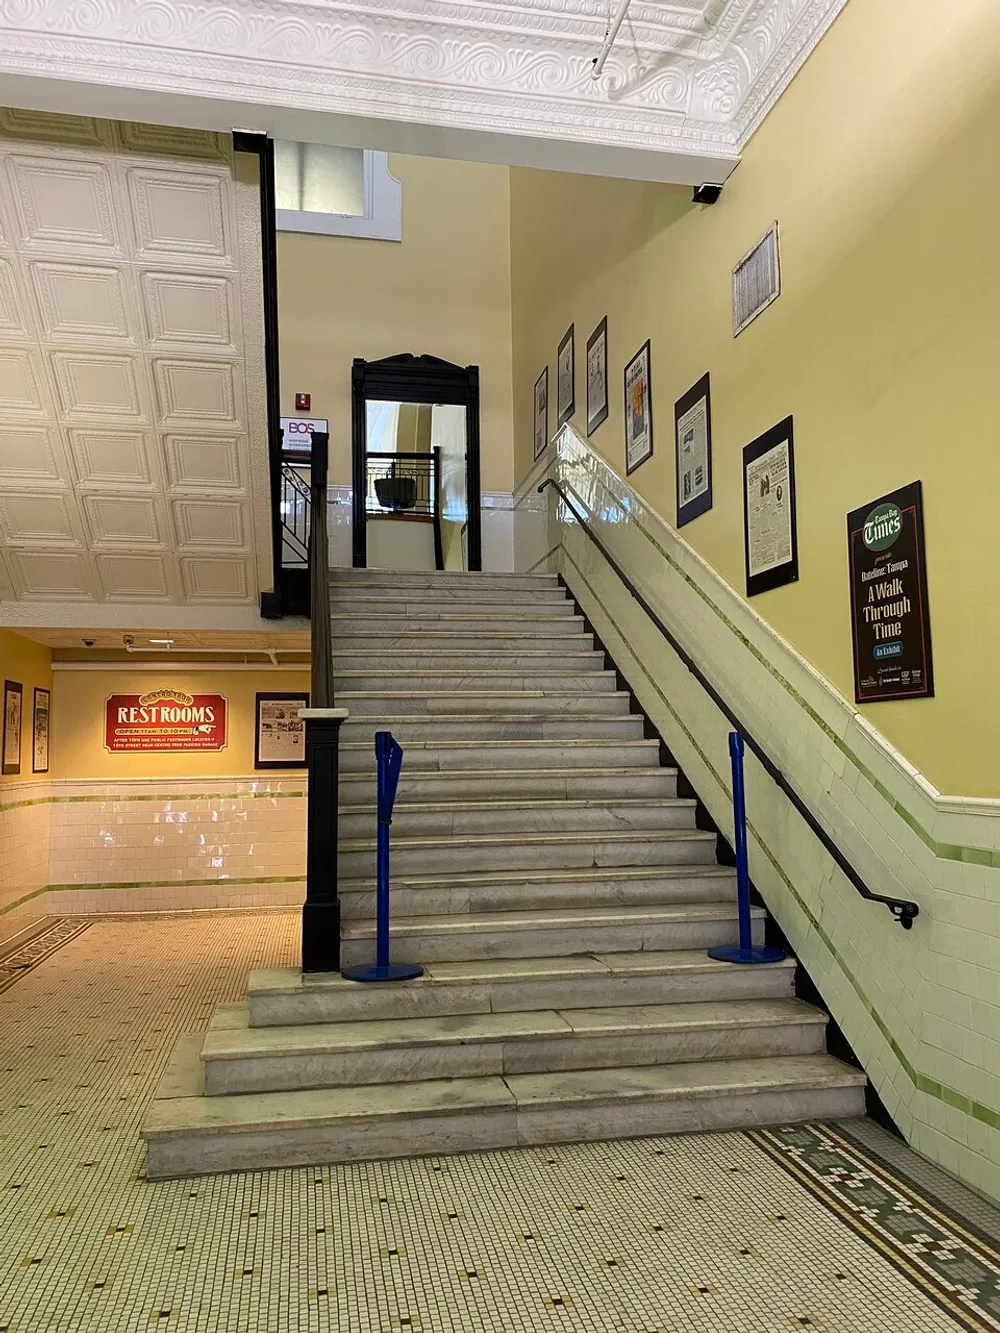 The photo shows an indoor staircase with decorative tiled floors framed pictures on the walls and signs indicating restrooms and an exhibition likely situated within a historic or public building